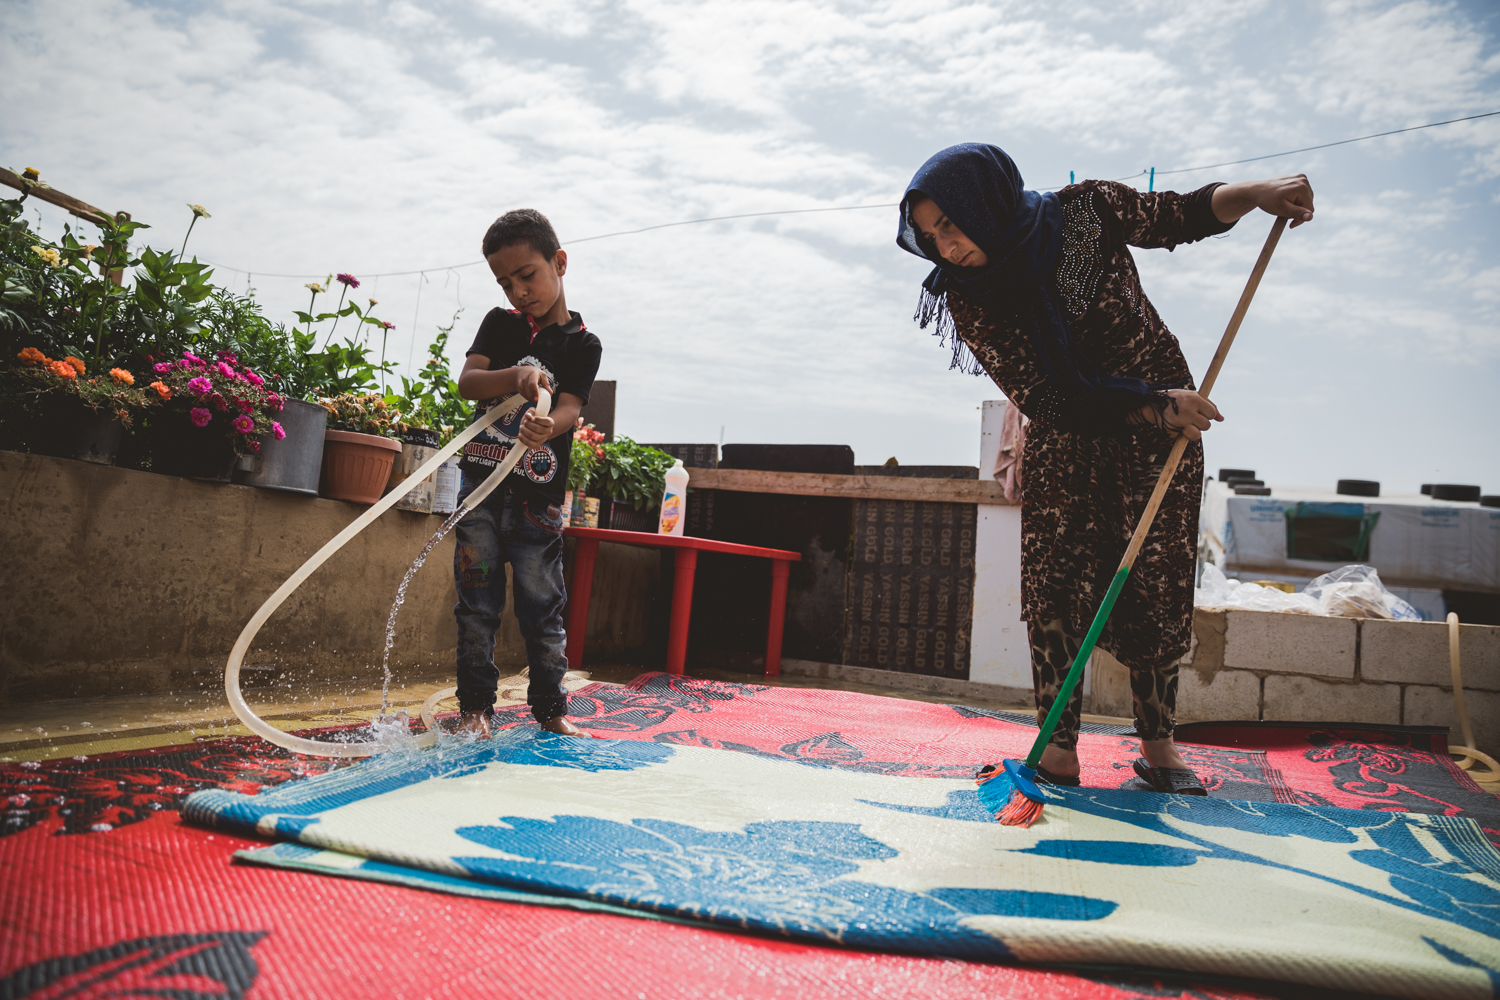  A young boy and his mother cleaning the rugs of their tent. 